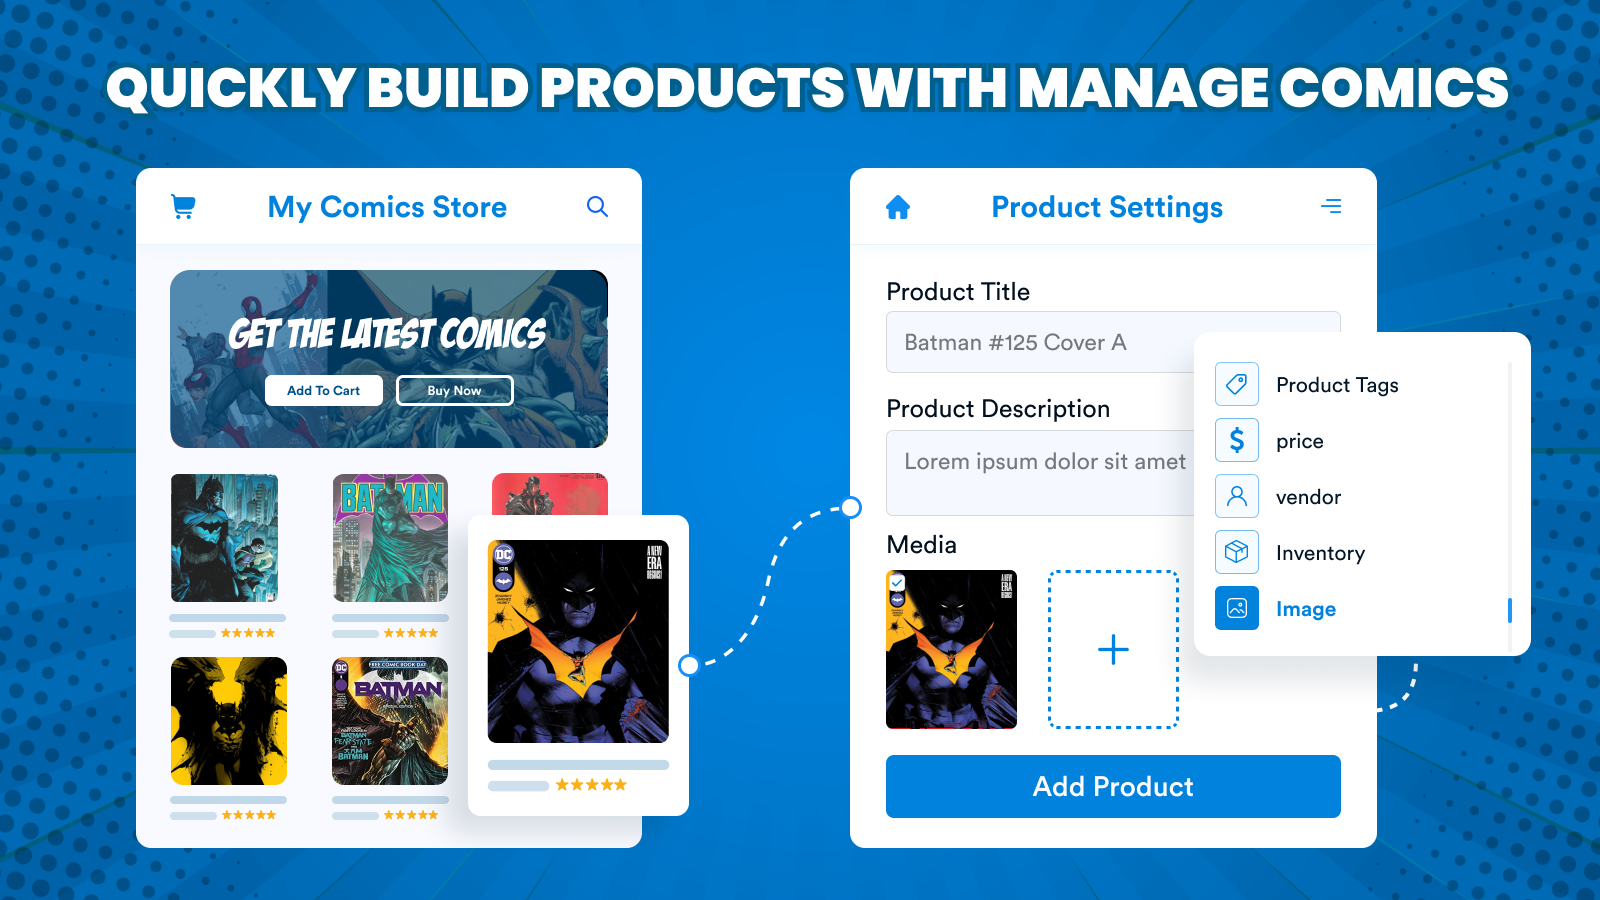 Quickly build products with Categories, vendors, tags, and COGS.